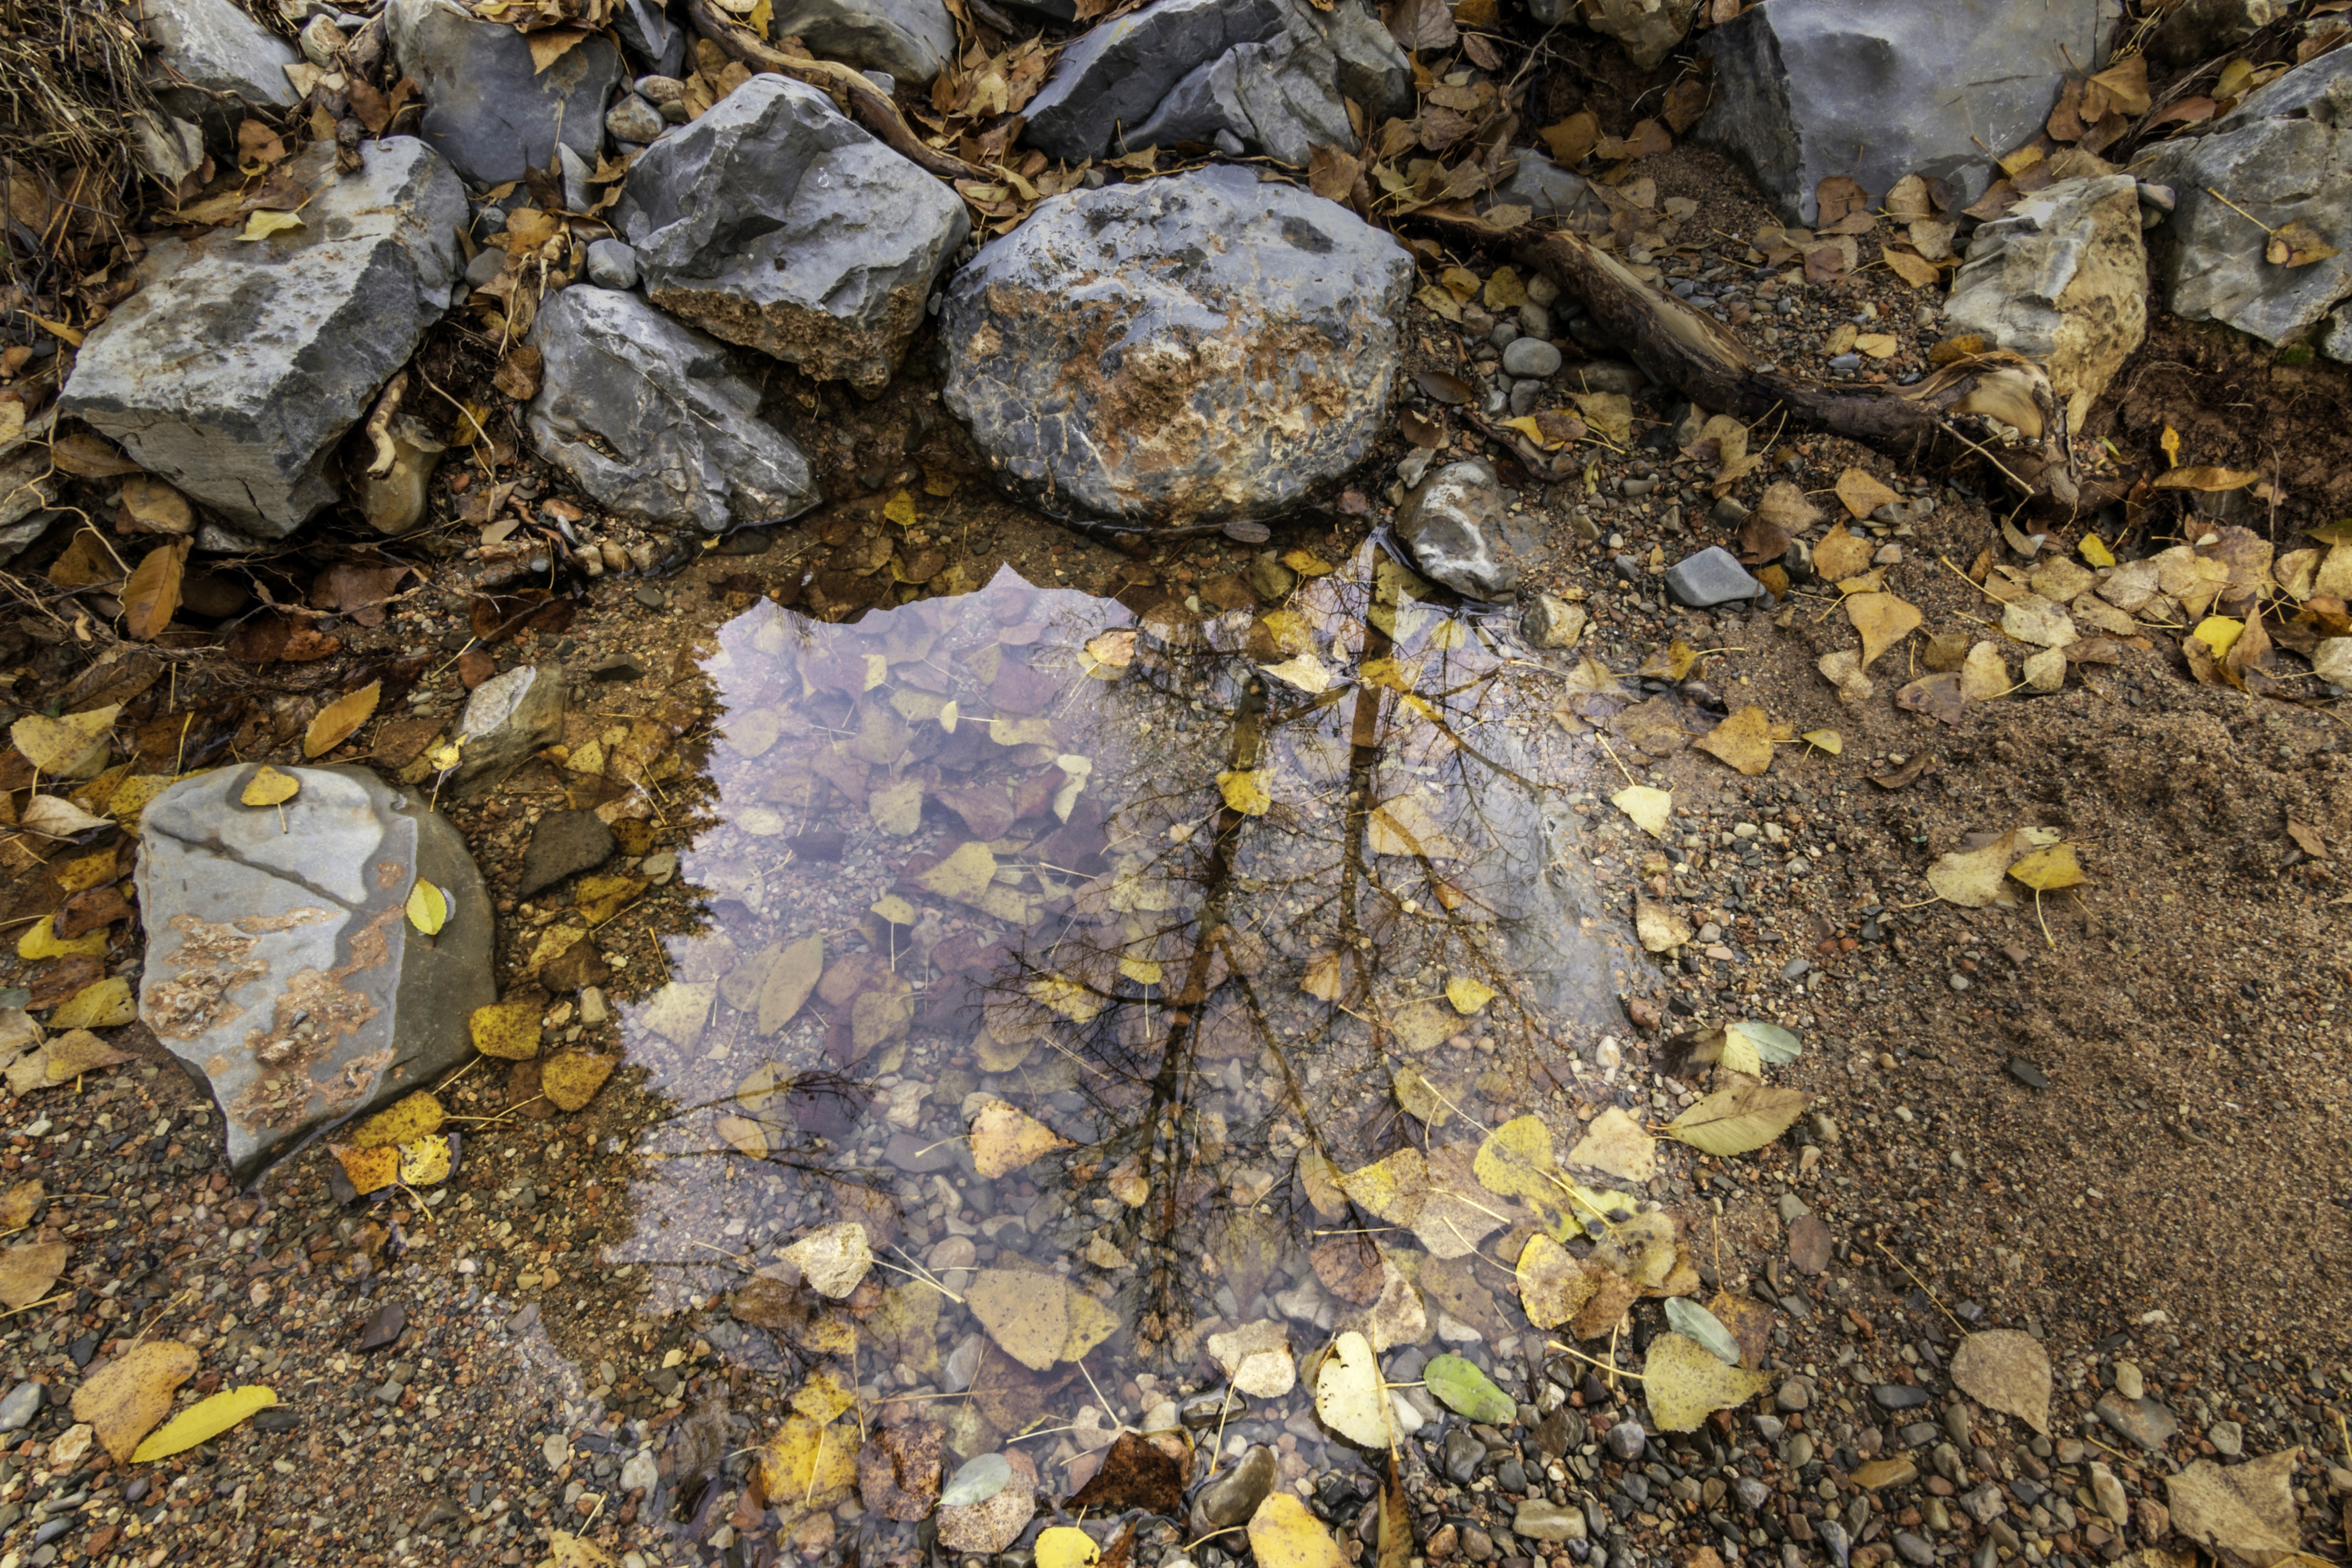 A top view of a mud and groundwater with the reflection of the trees and foliage